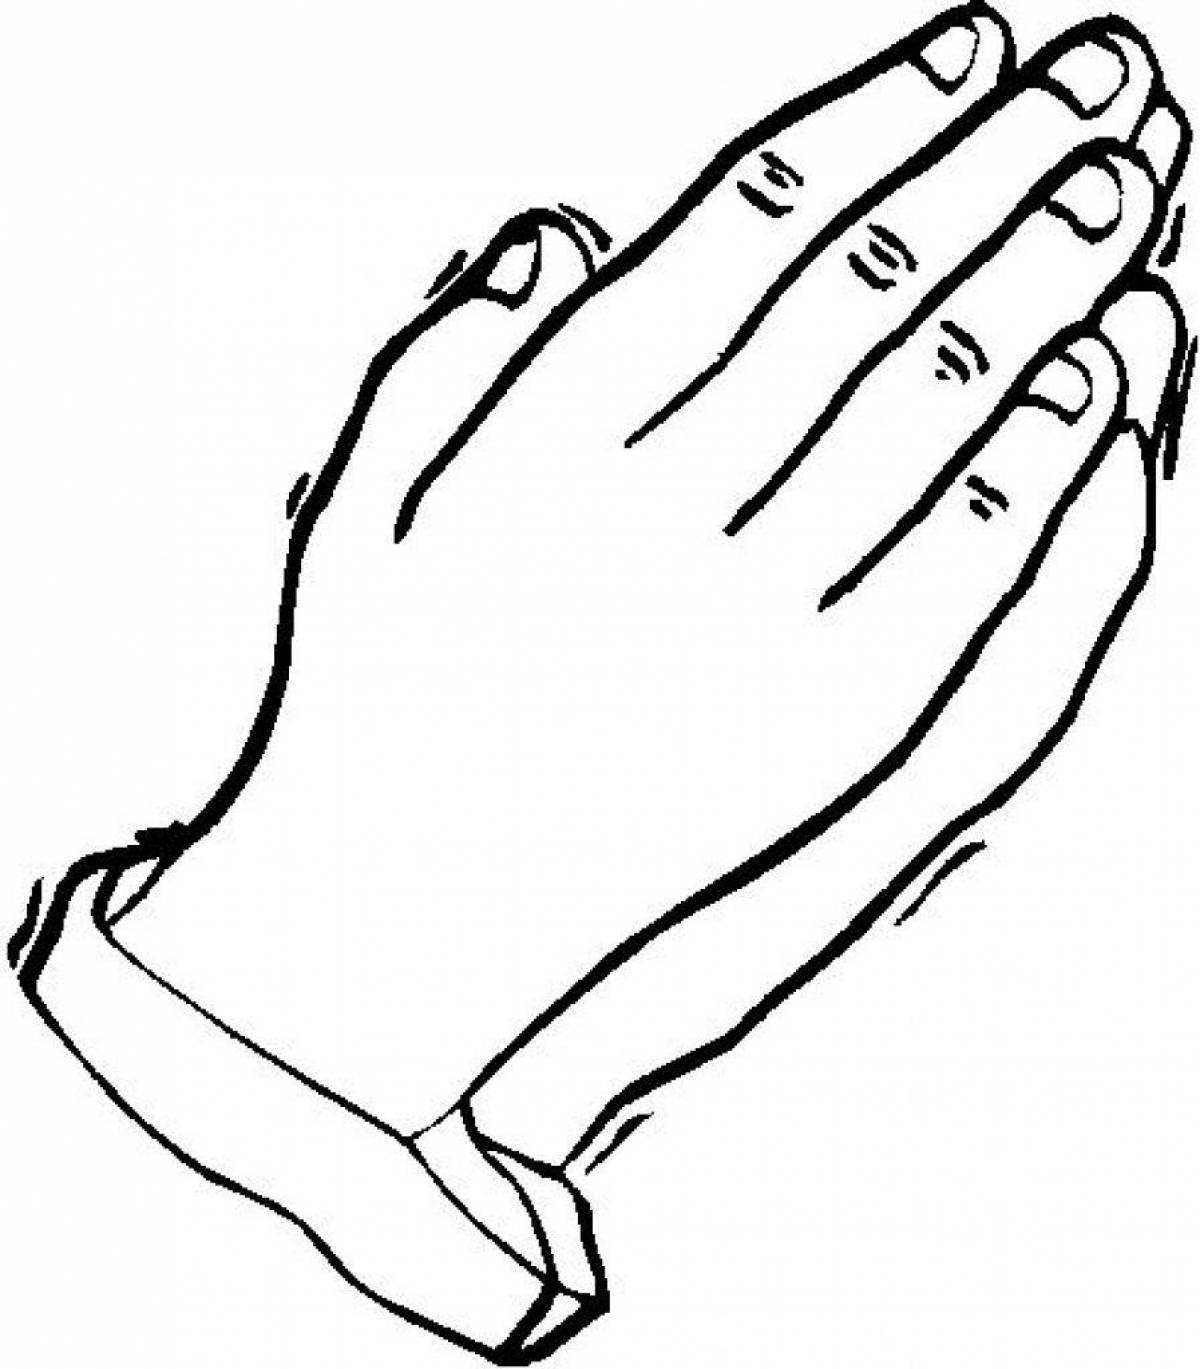 Fun hands coloring page